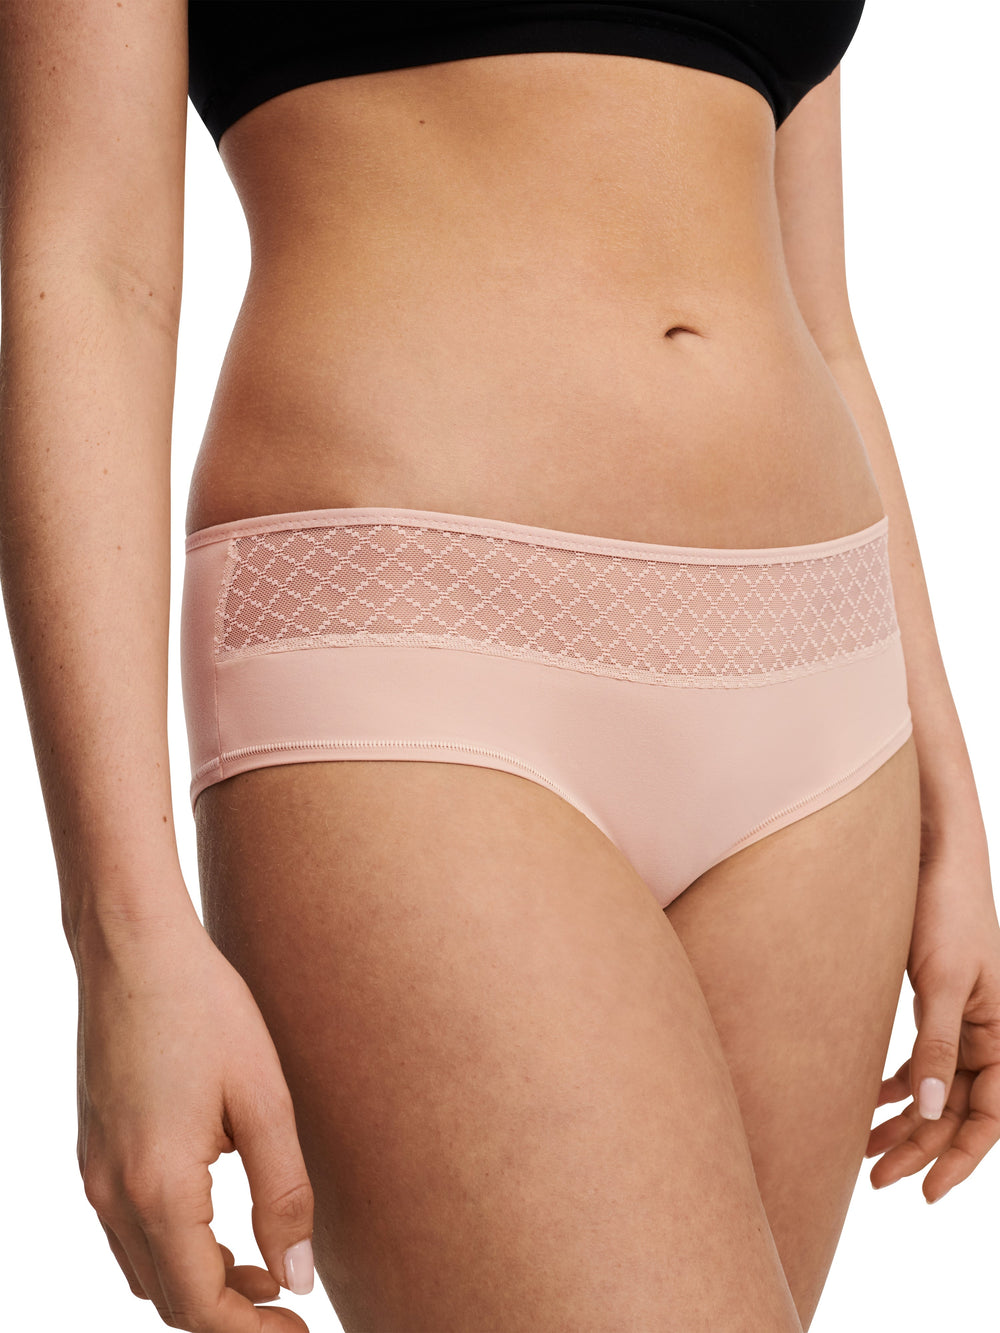 Chantelle EasyFeel - Shorty Couvrant Norah Chic Shorty Rose Pâle Chantelle EasyFeel